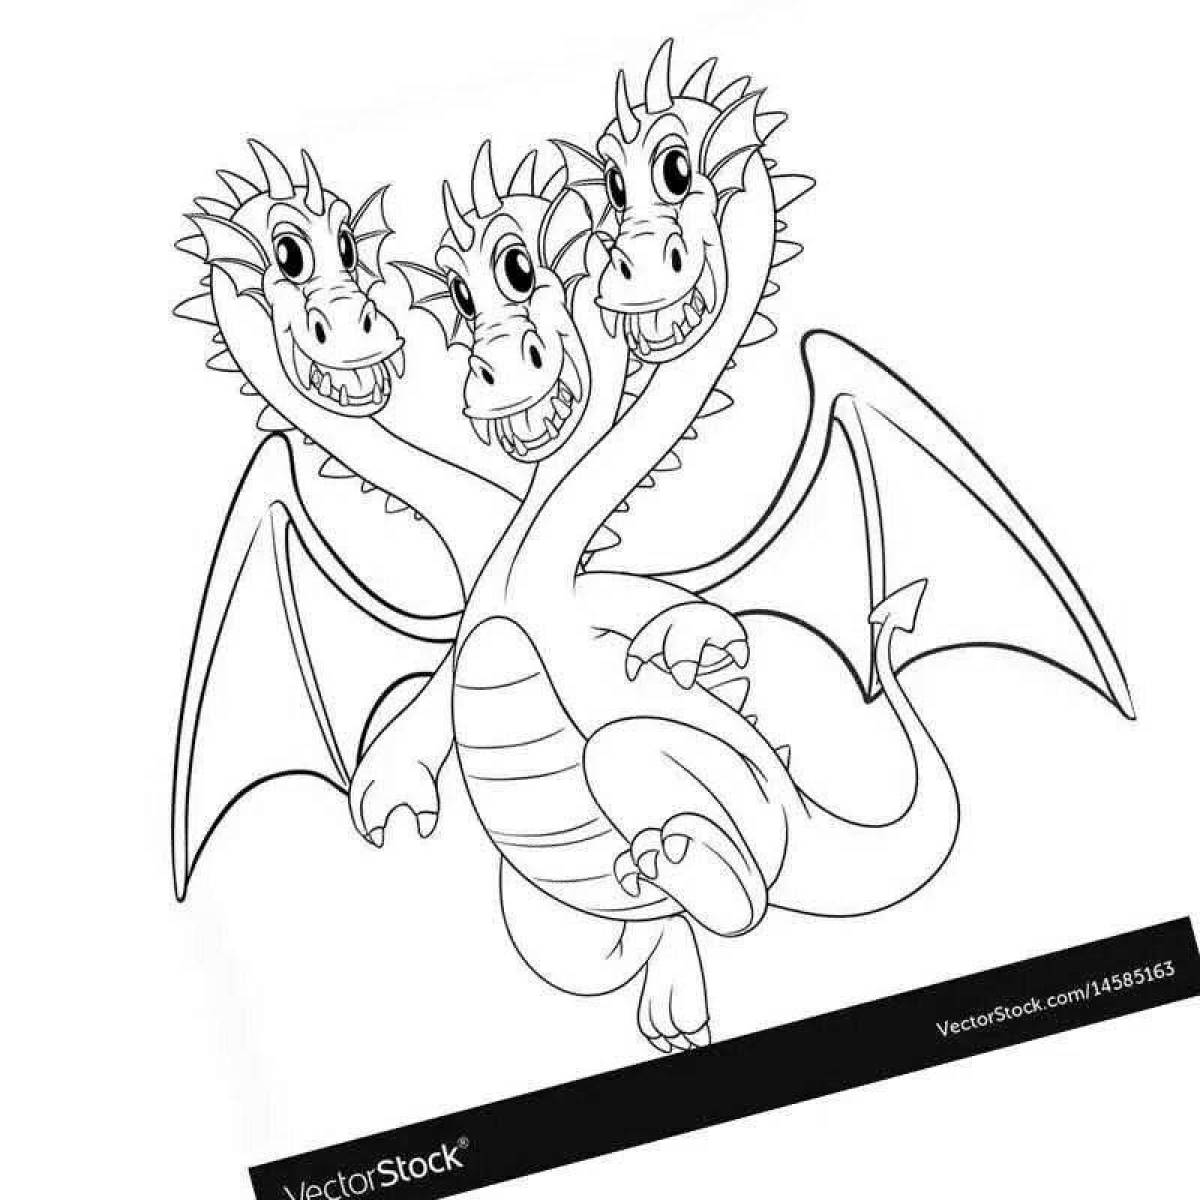 Intricate dragon coloring page